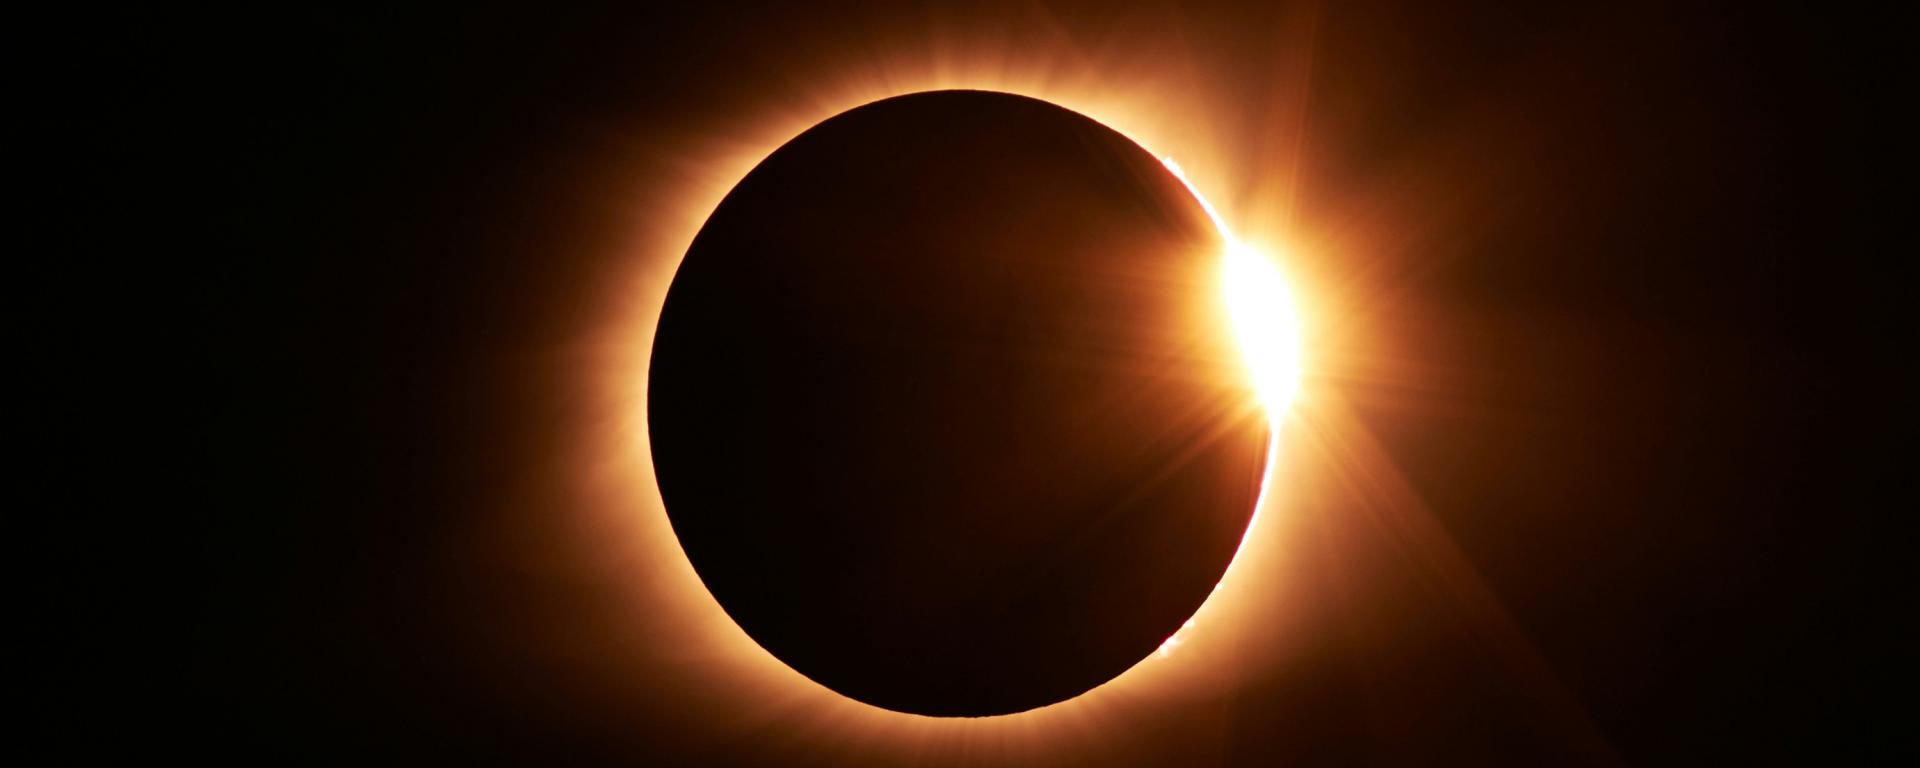 Image of sun entering eclipse in 